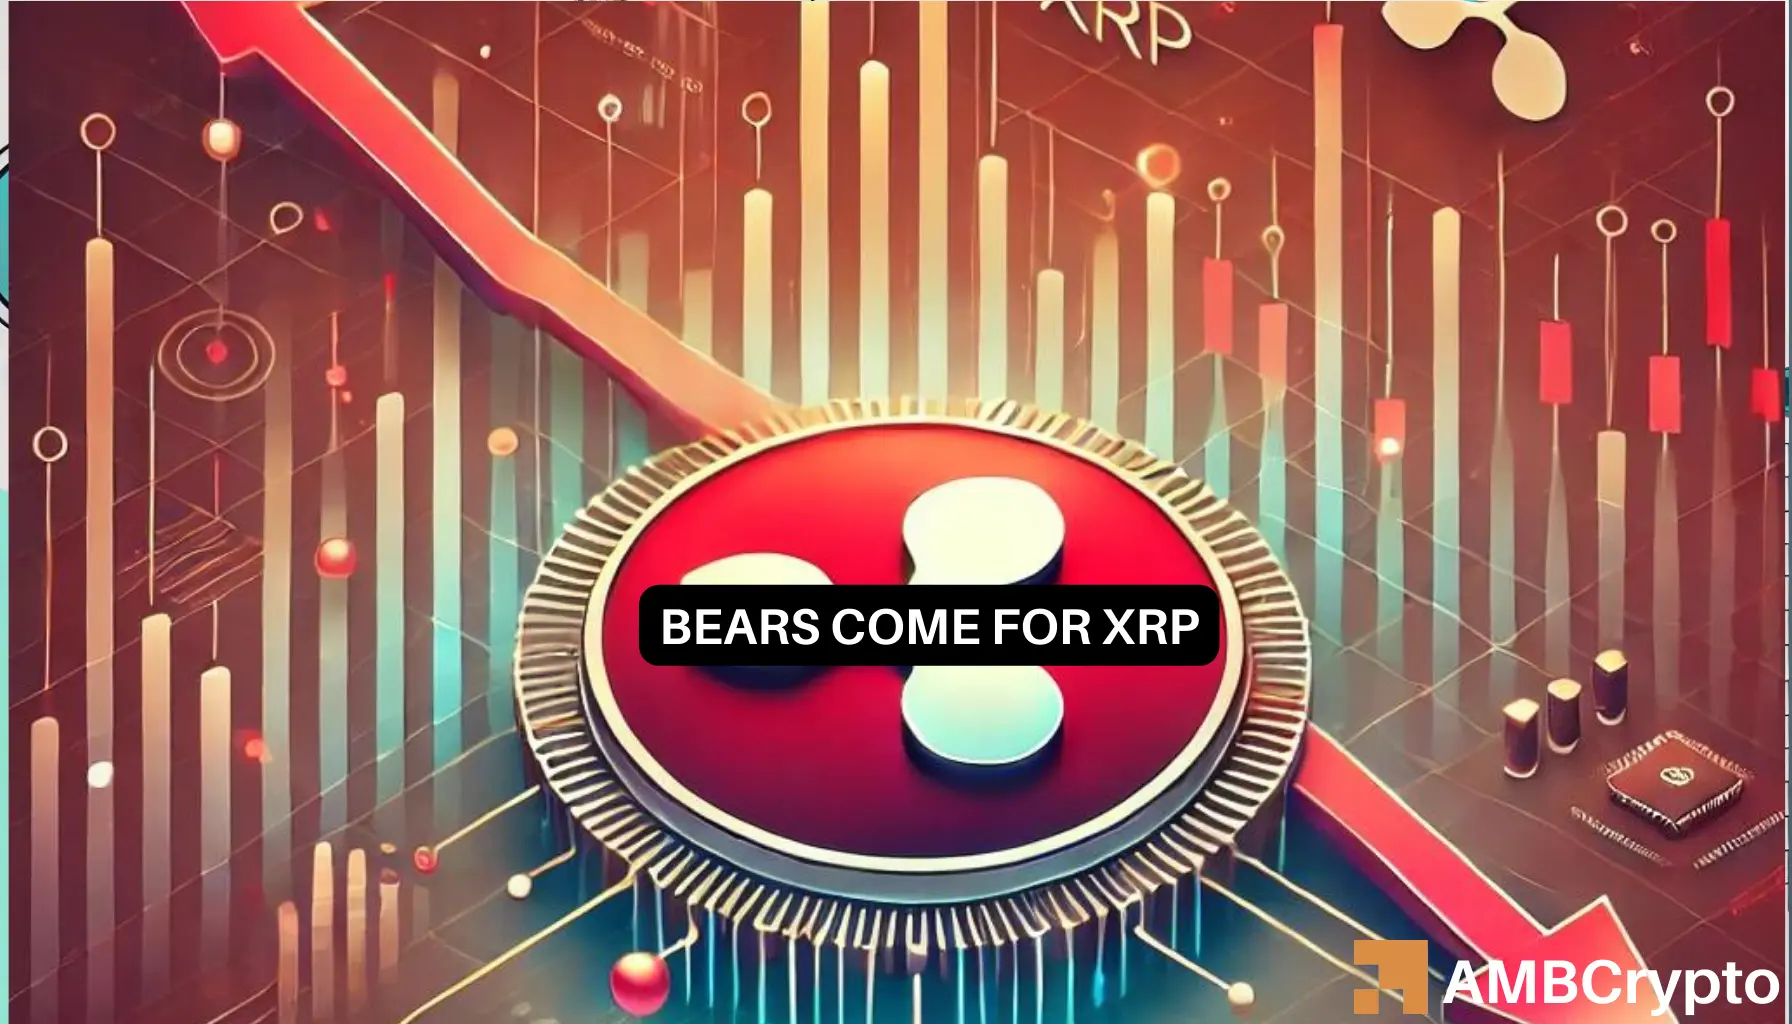 Short sellers target XRP: What will happen to the struggling altcoin?